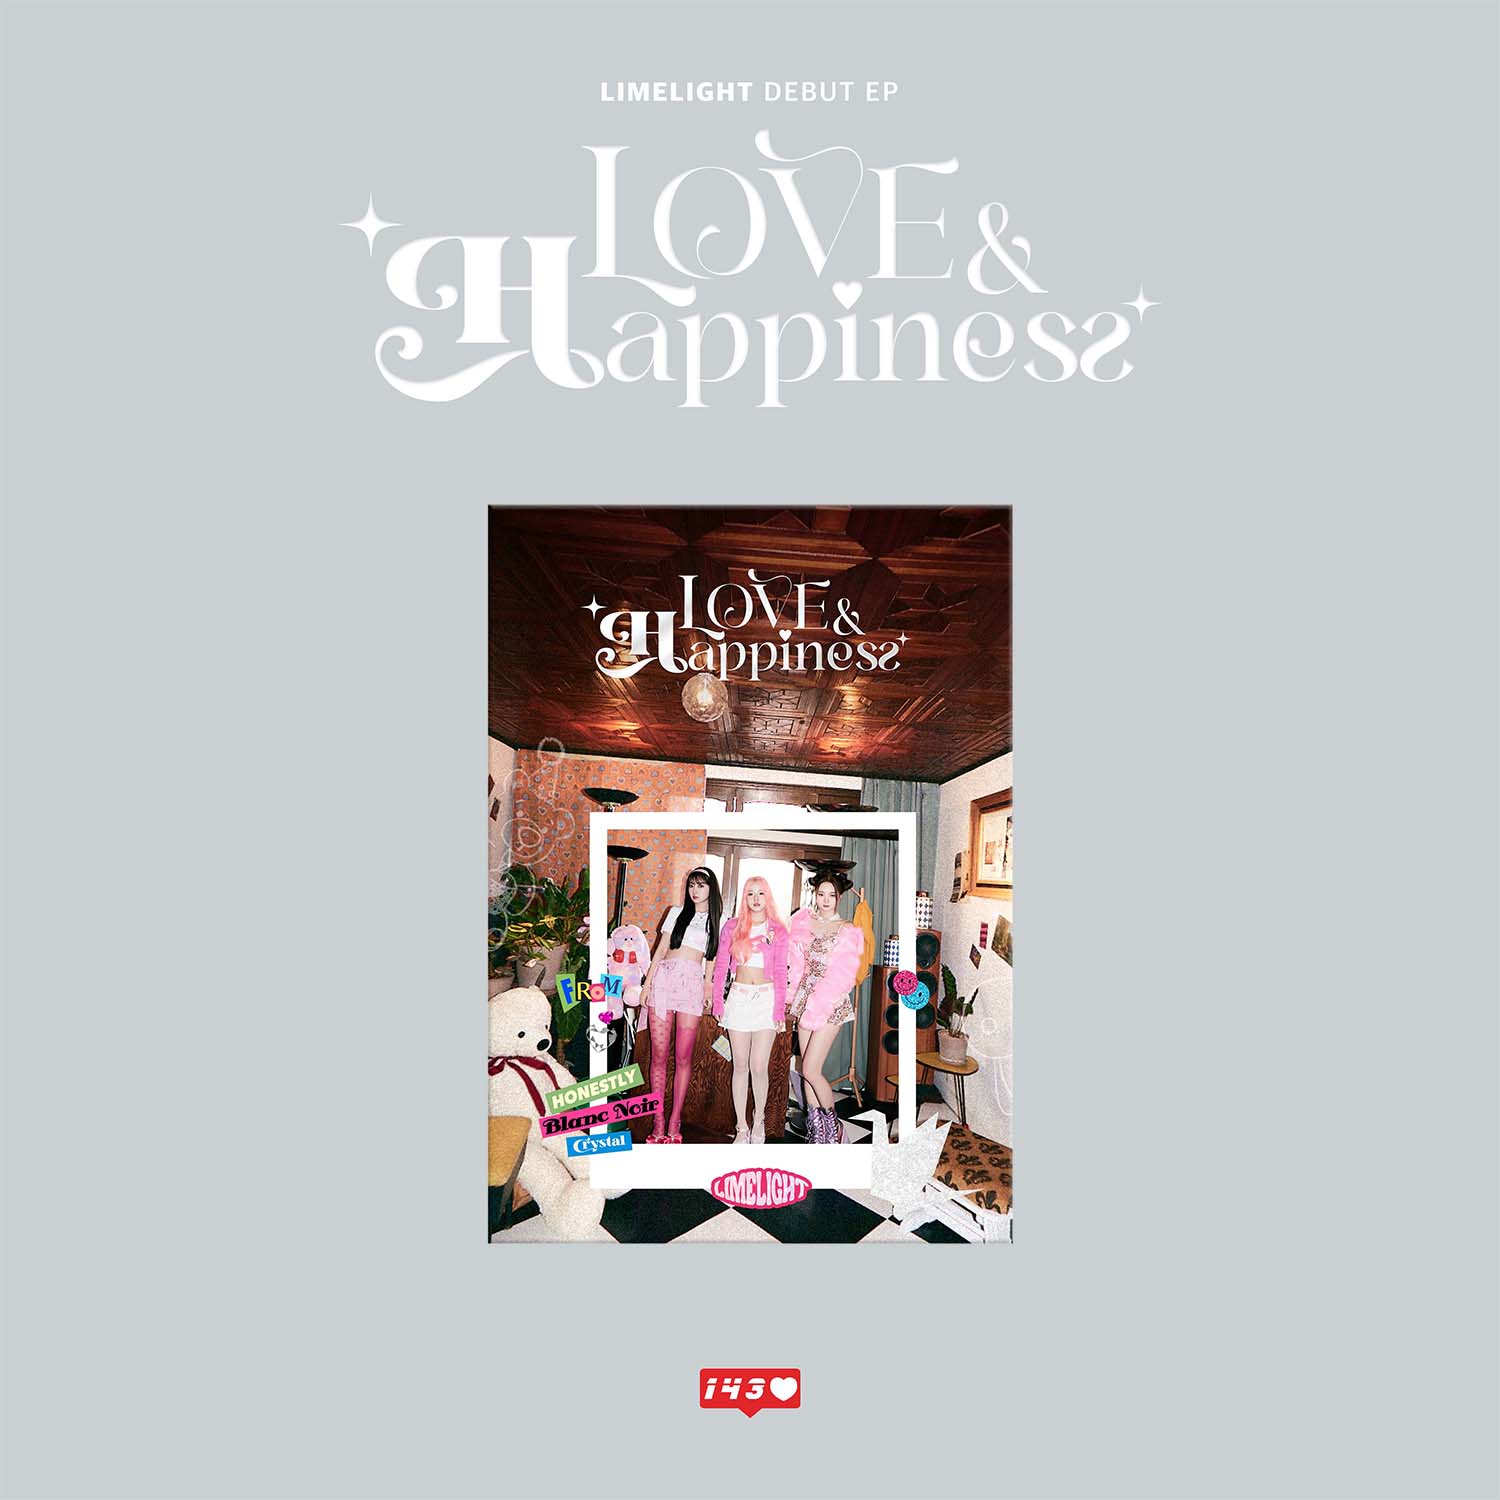 LIMELIGHT DEBUT EP ALBUM 'LOVE & HAPPINESS' FROM VERSION COVER